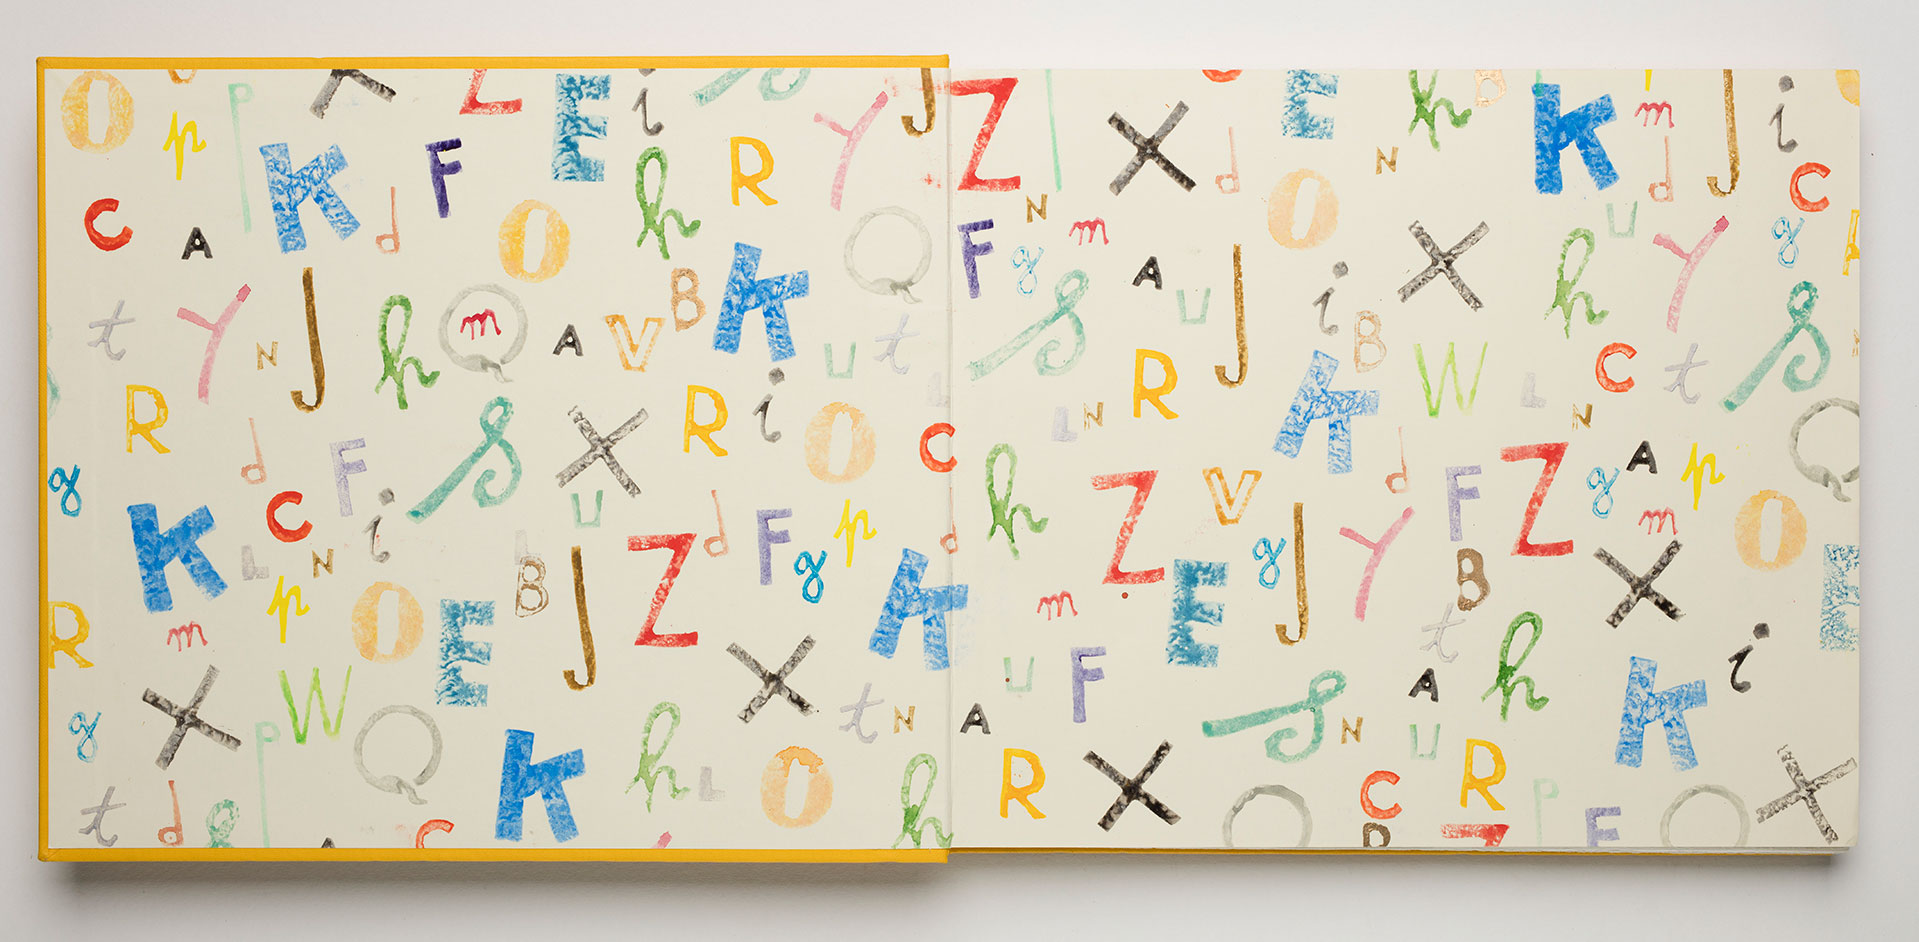 Endpapers with illustrated, colourful letters of the alphabet in various styles.